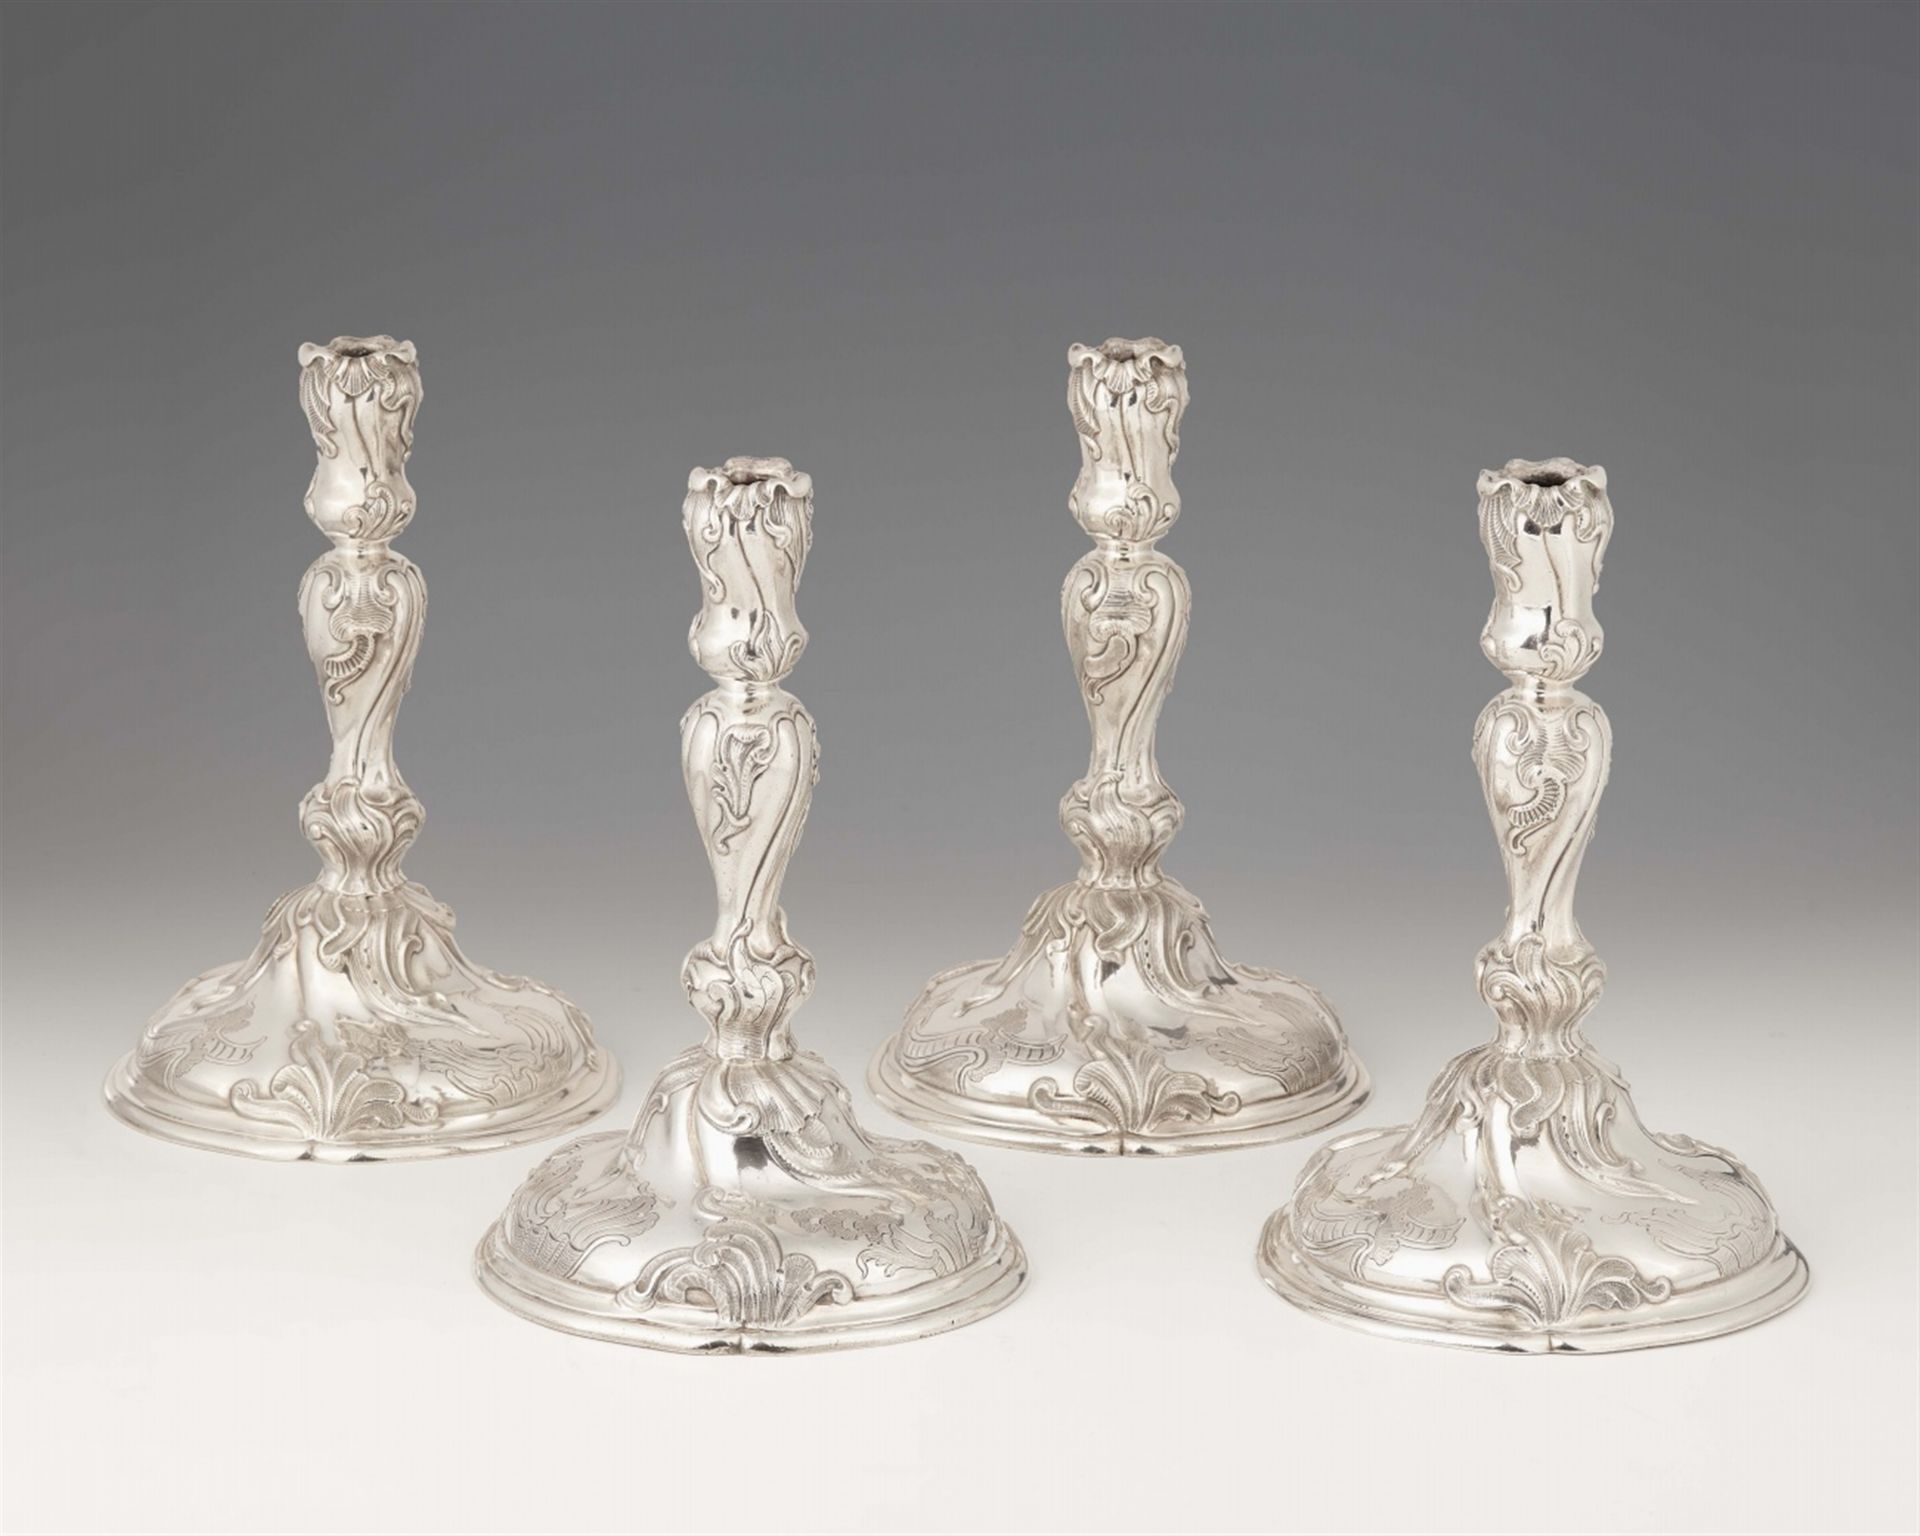 A set of four Dresden silver candlesticks made for Prince Elector August II of Saxony